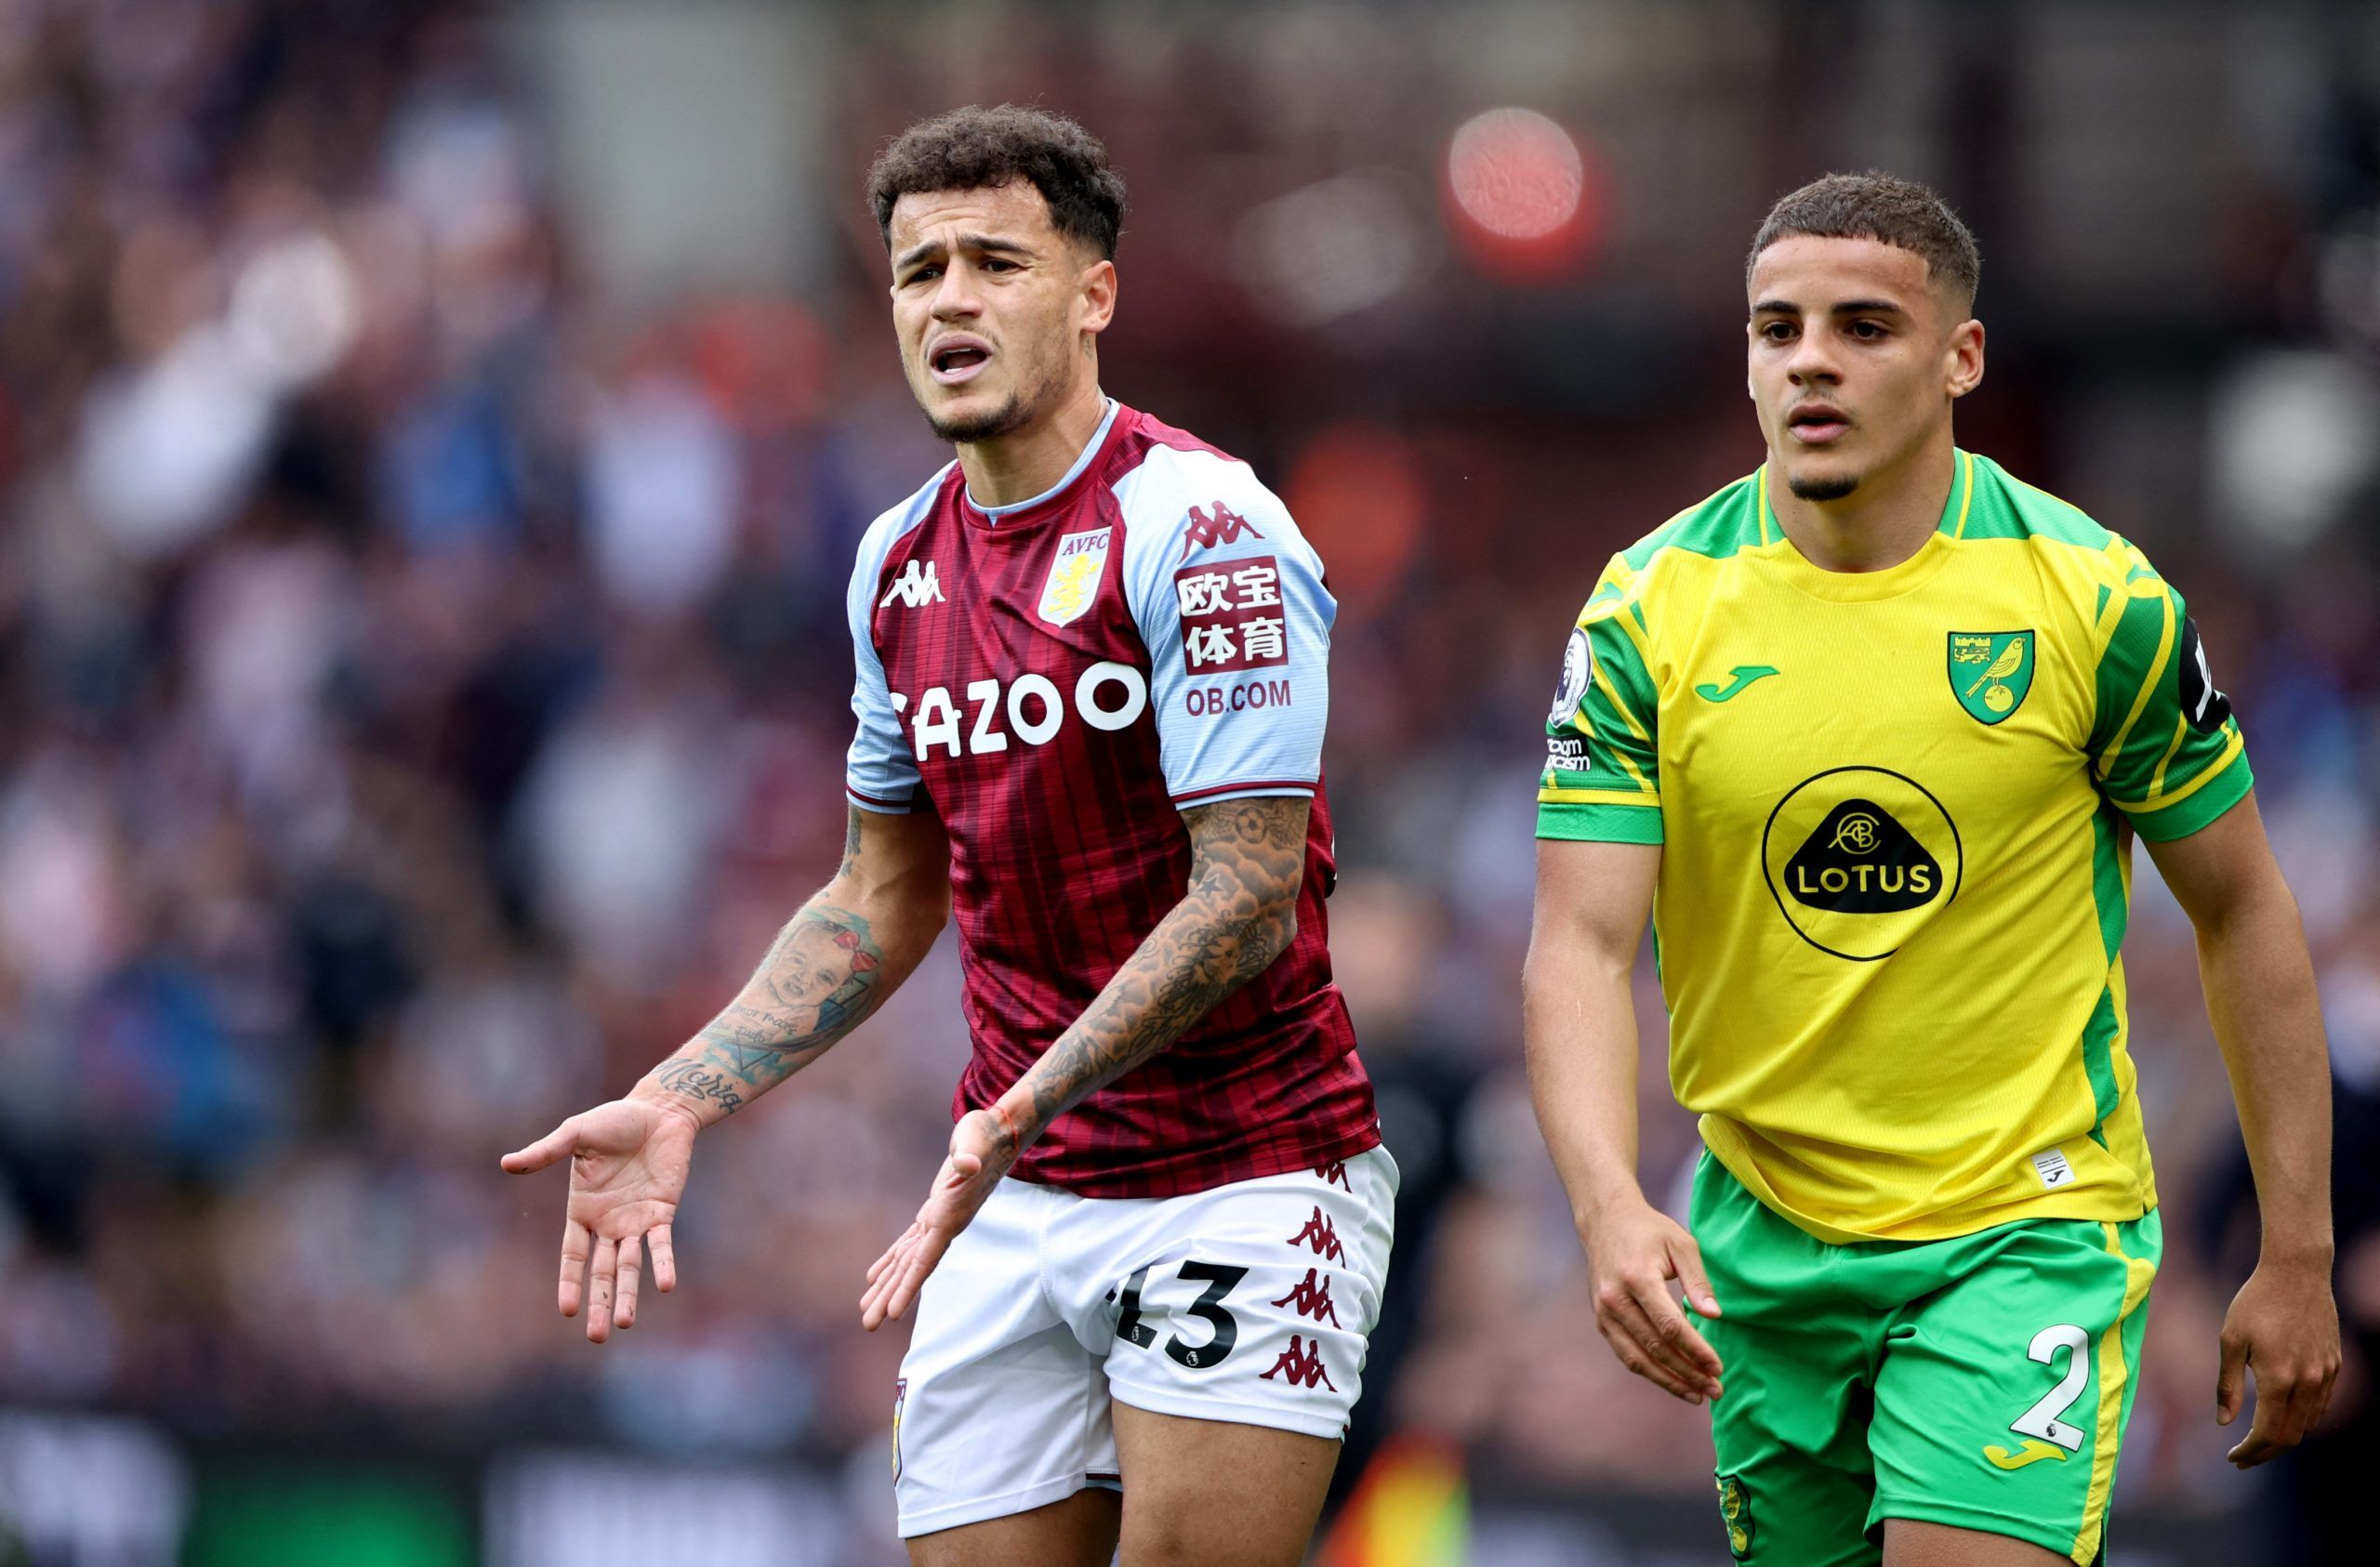 philippe-coutinho-aston-villa-steven-gerrard-villa-park-liverpool-jurgen-klopp-premier-league-titleSoccer Football - Premier League - Aston Villa v Norwich City - Villa Park, Birmingham, Britain - April 30, 2022 Aston Villa's Philippe Coutinho and Norwich City's Max Aarons during the match Action Images via Reuters/Molly Darlington EDITORIAL USE ONLY. No use with unauthorized audio, video, data, fixture lists, club/league logos or 'live' services. Online in-match use limited to 75 images, no vid